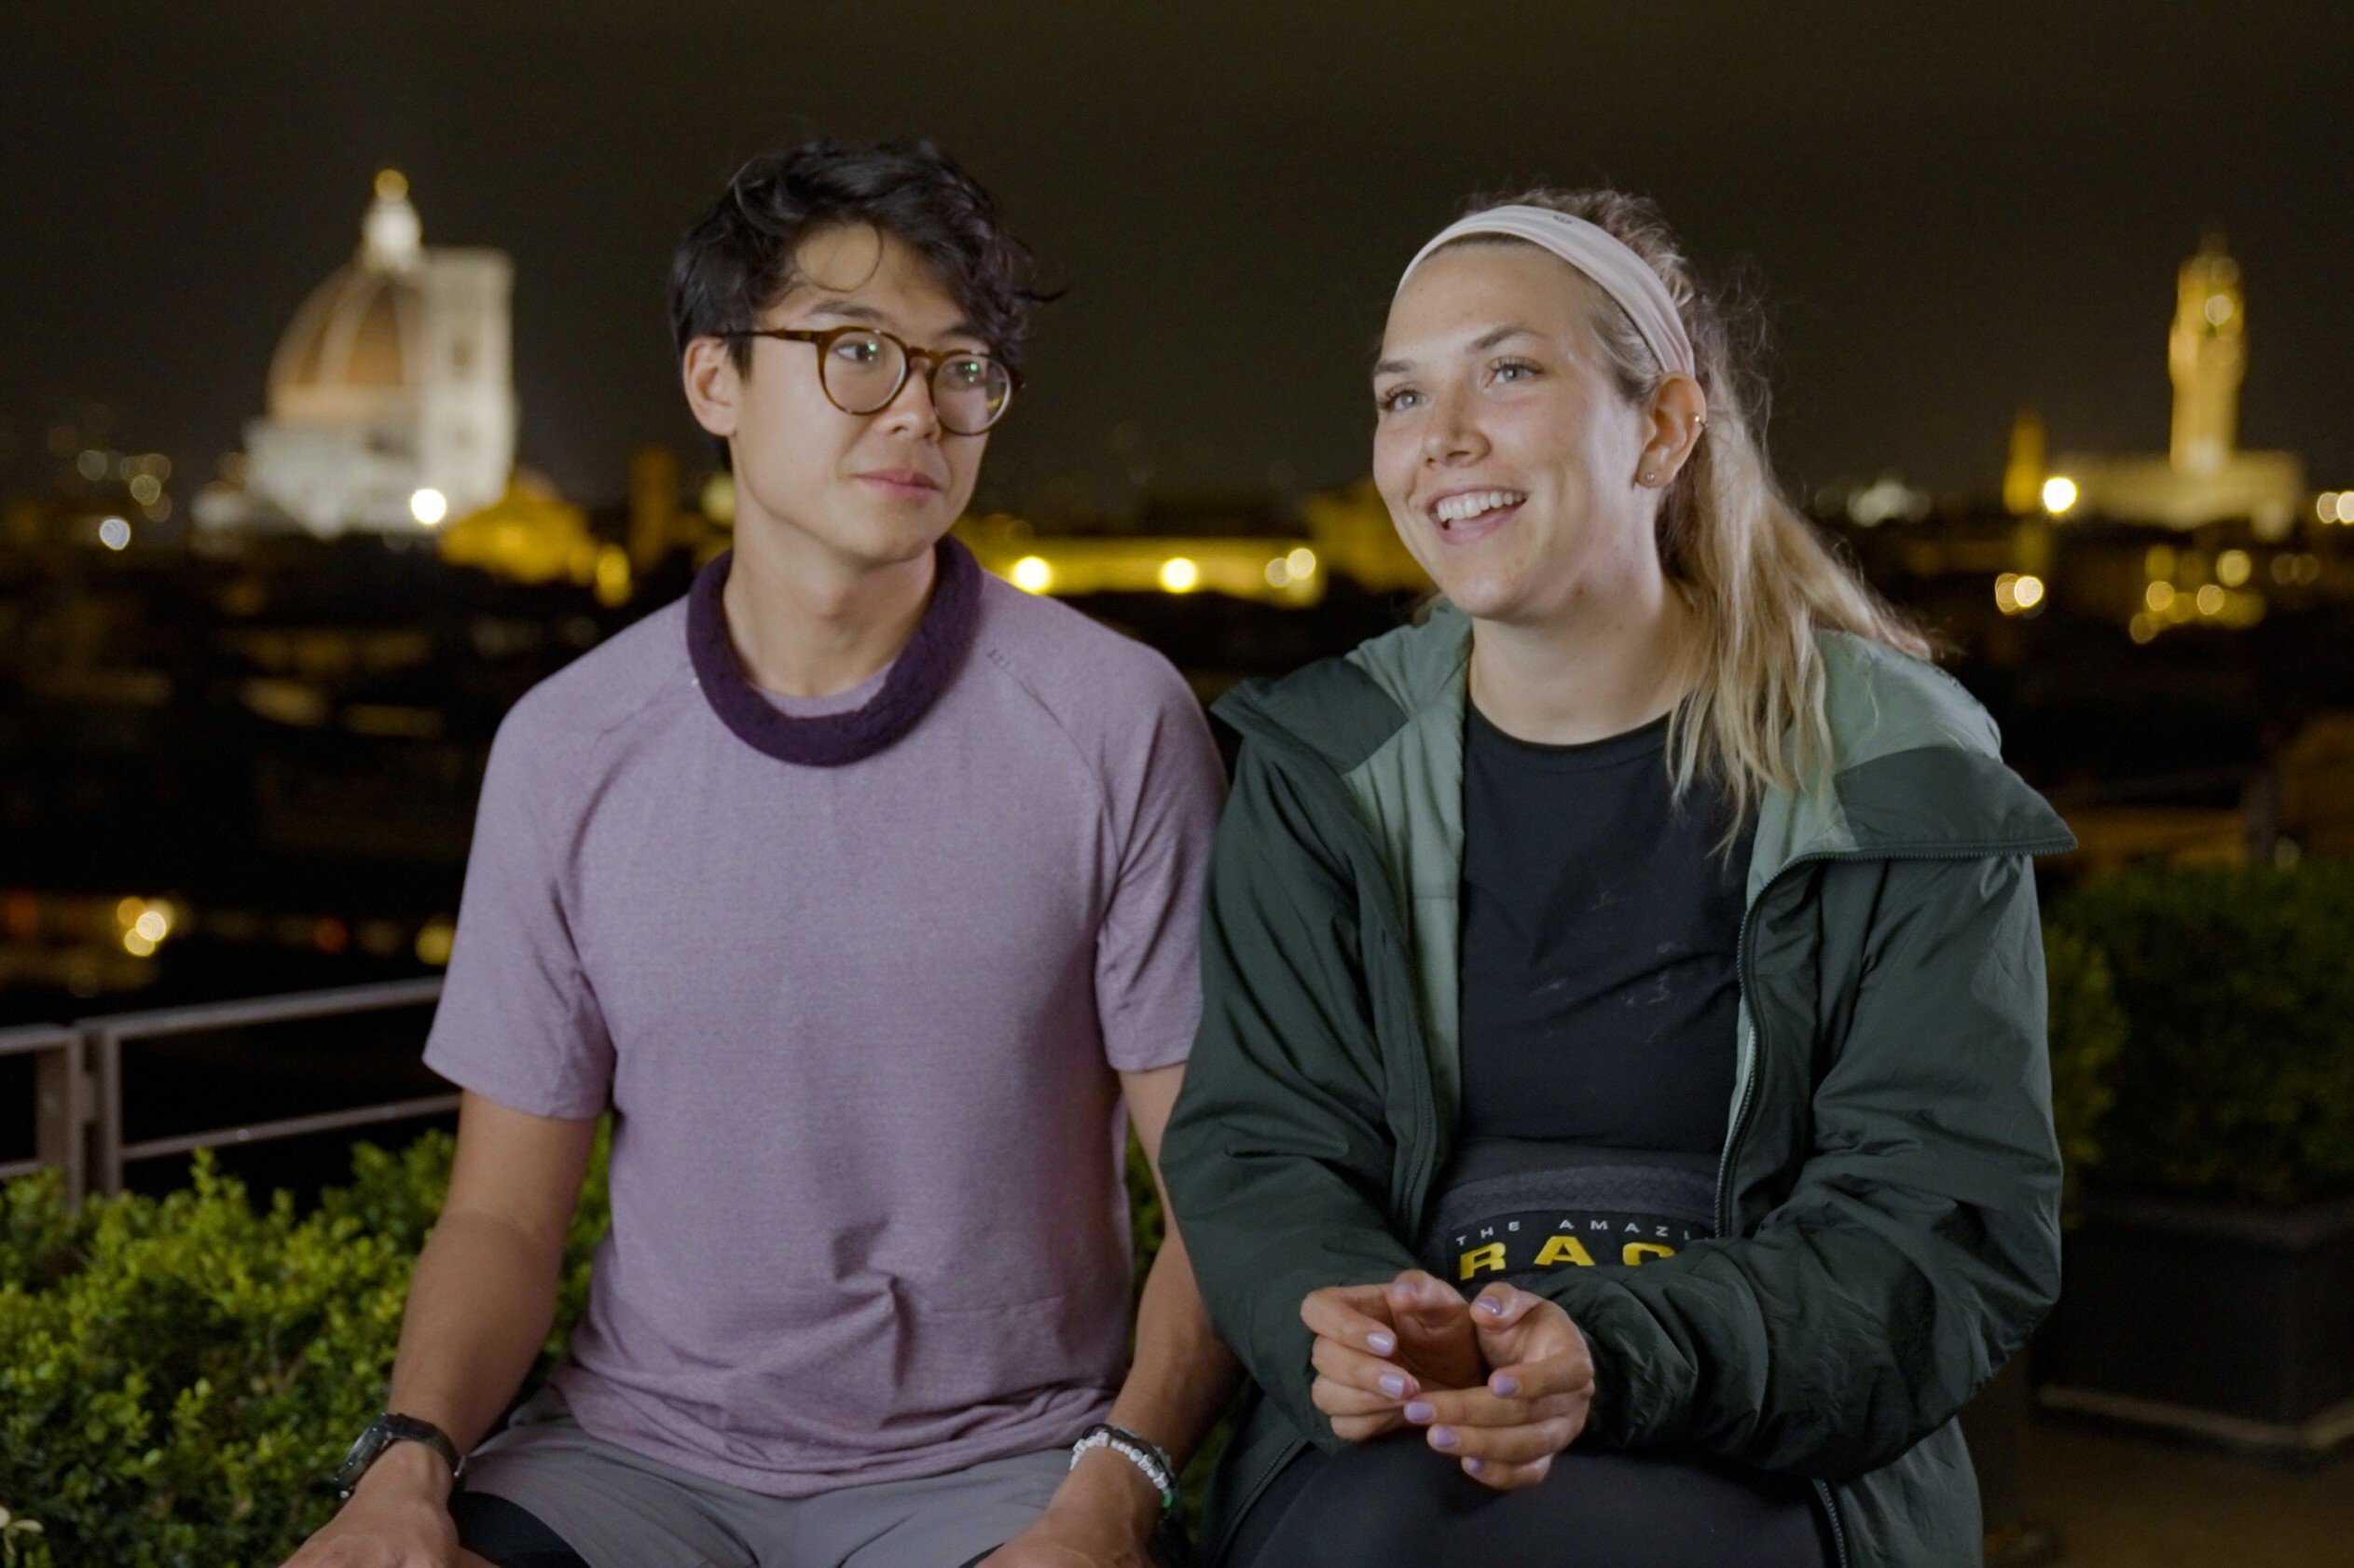 Derek Xiao and Claire Rehfuss, who might be the winner of 'The Amazing Race' Season 34 on CBS, sit next to each other while filming a confessional at night. Derek wears a purple shirt and gray shorts. Claire wears a green jacket over a black shirt and black pants.